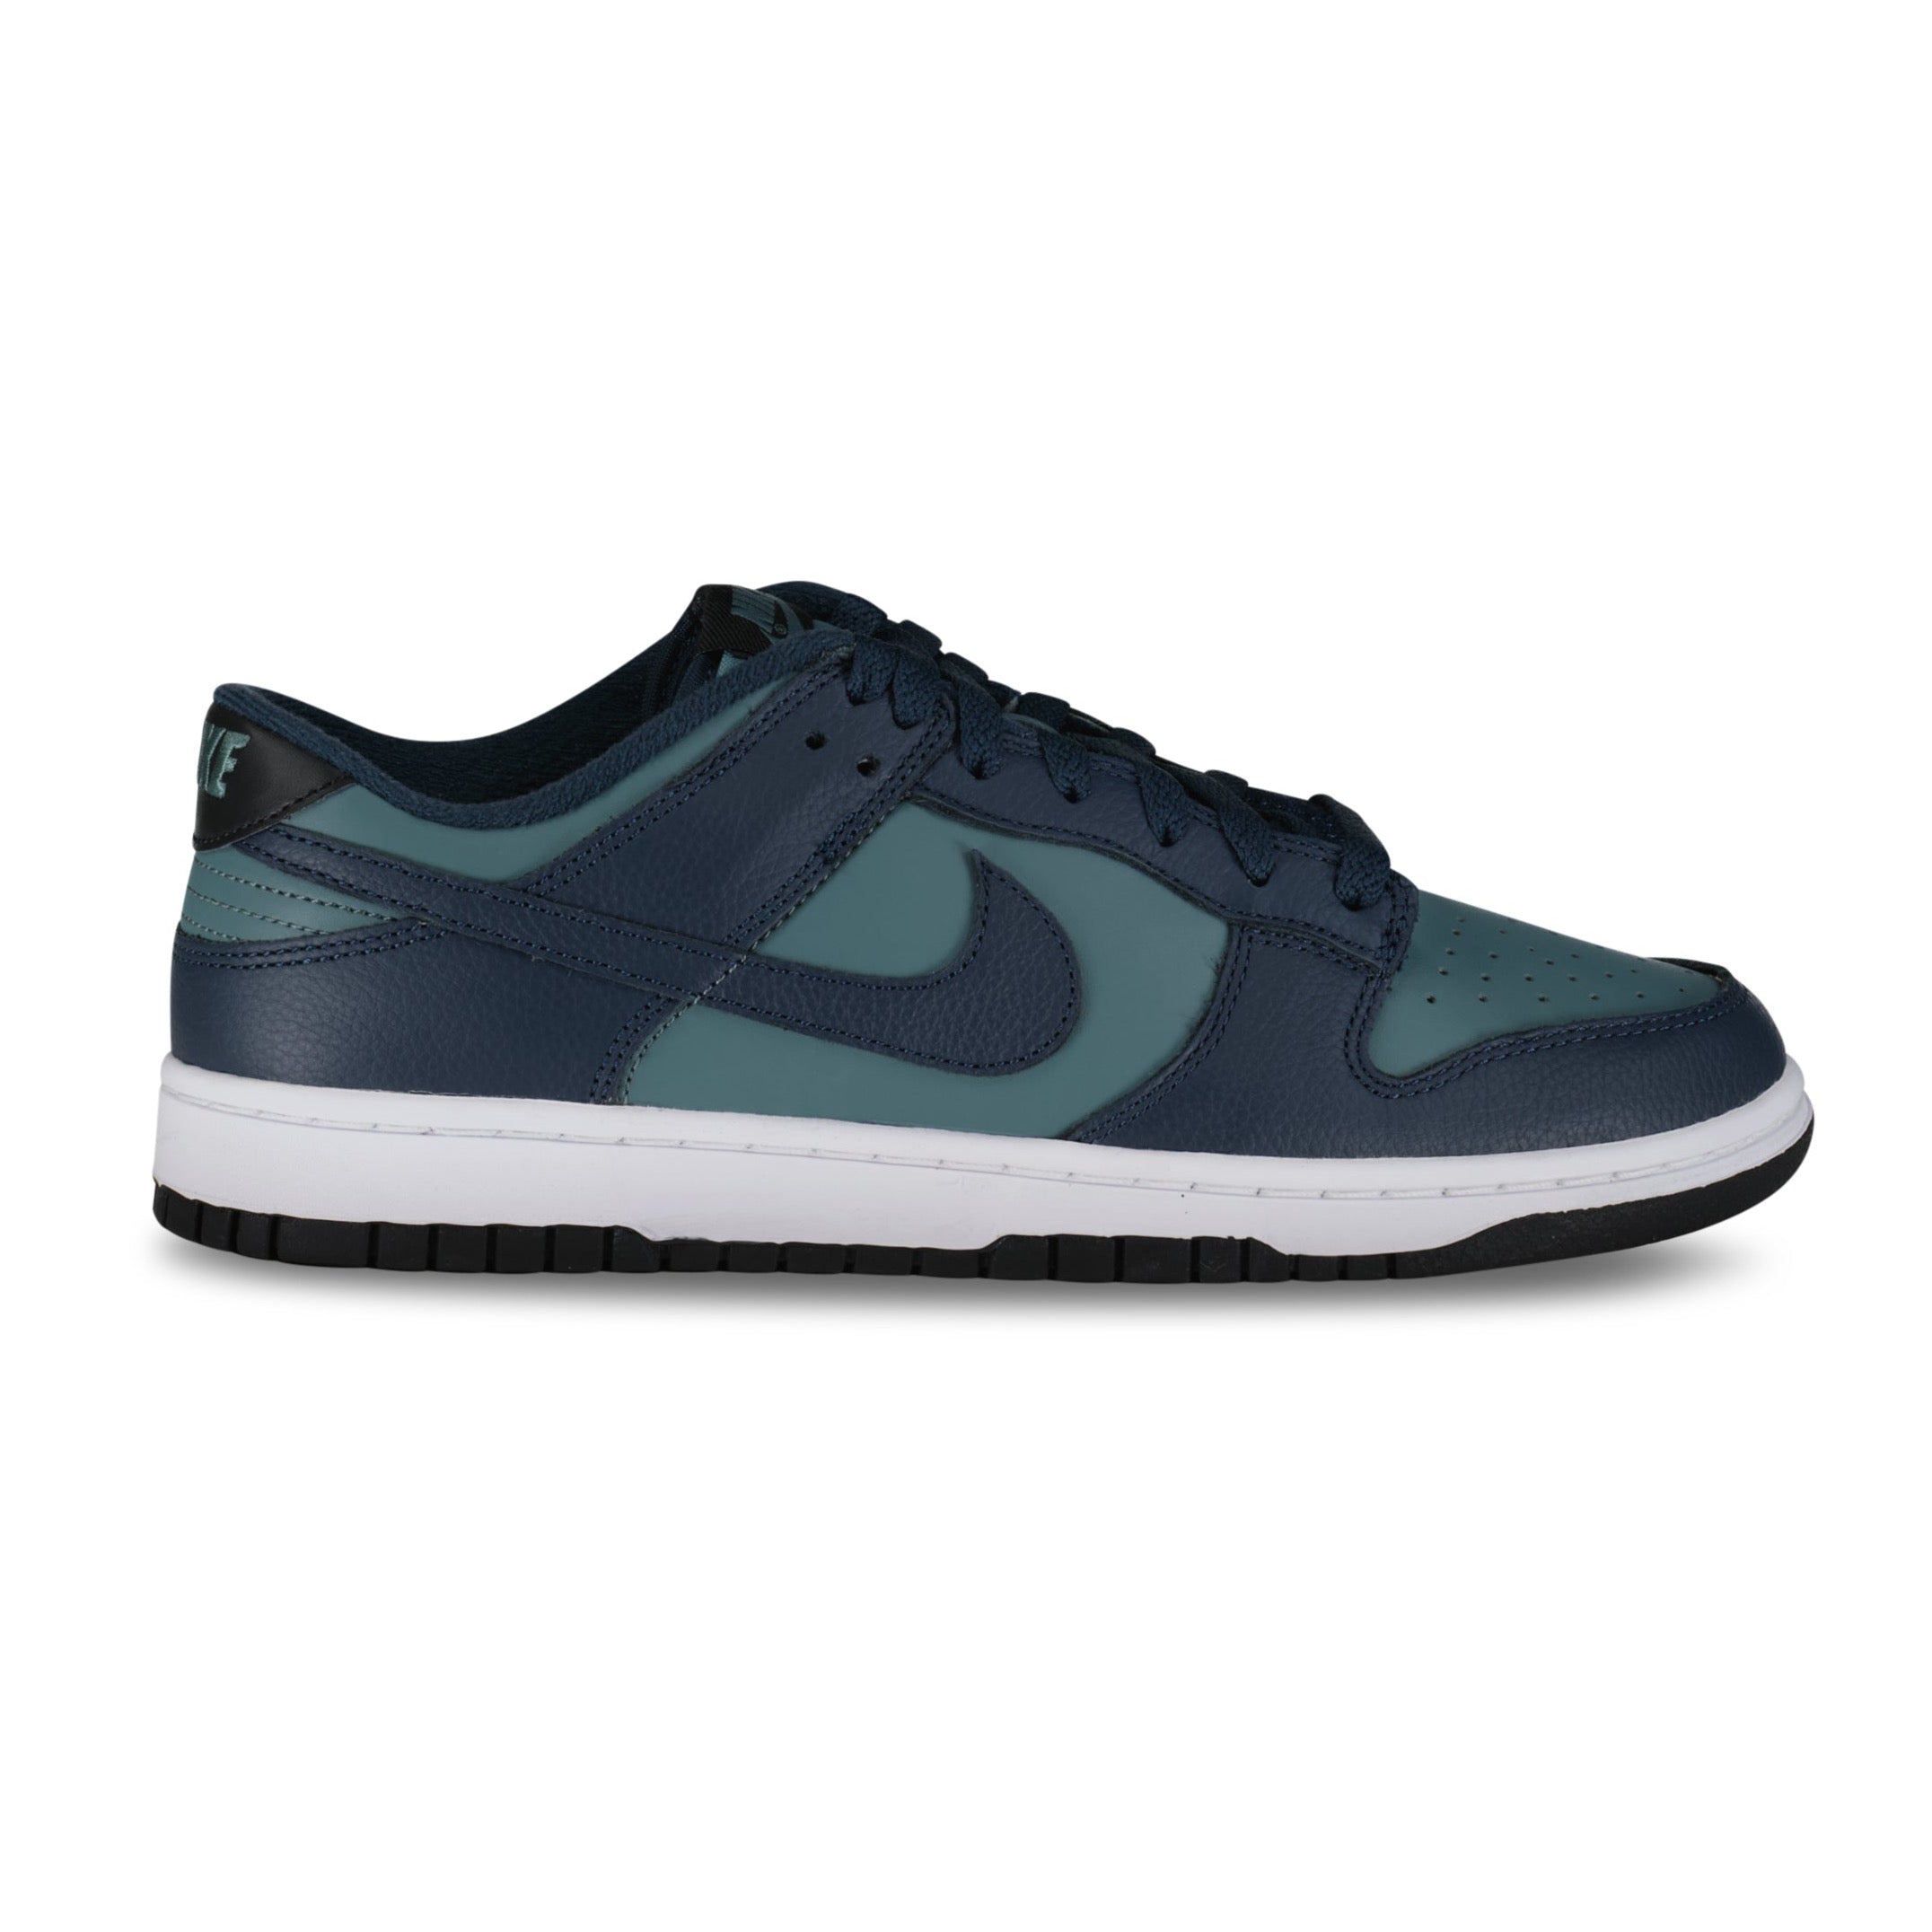 NIKE DUNK LOW 'ARMOURY NAVY/MINERAL SLATE' TRAINERS